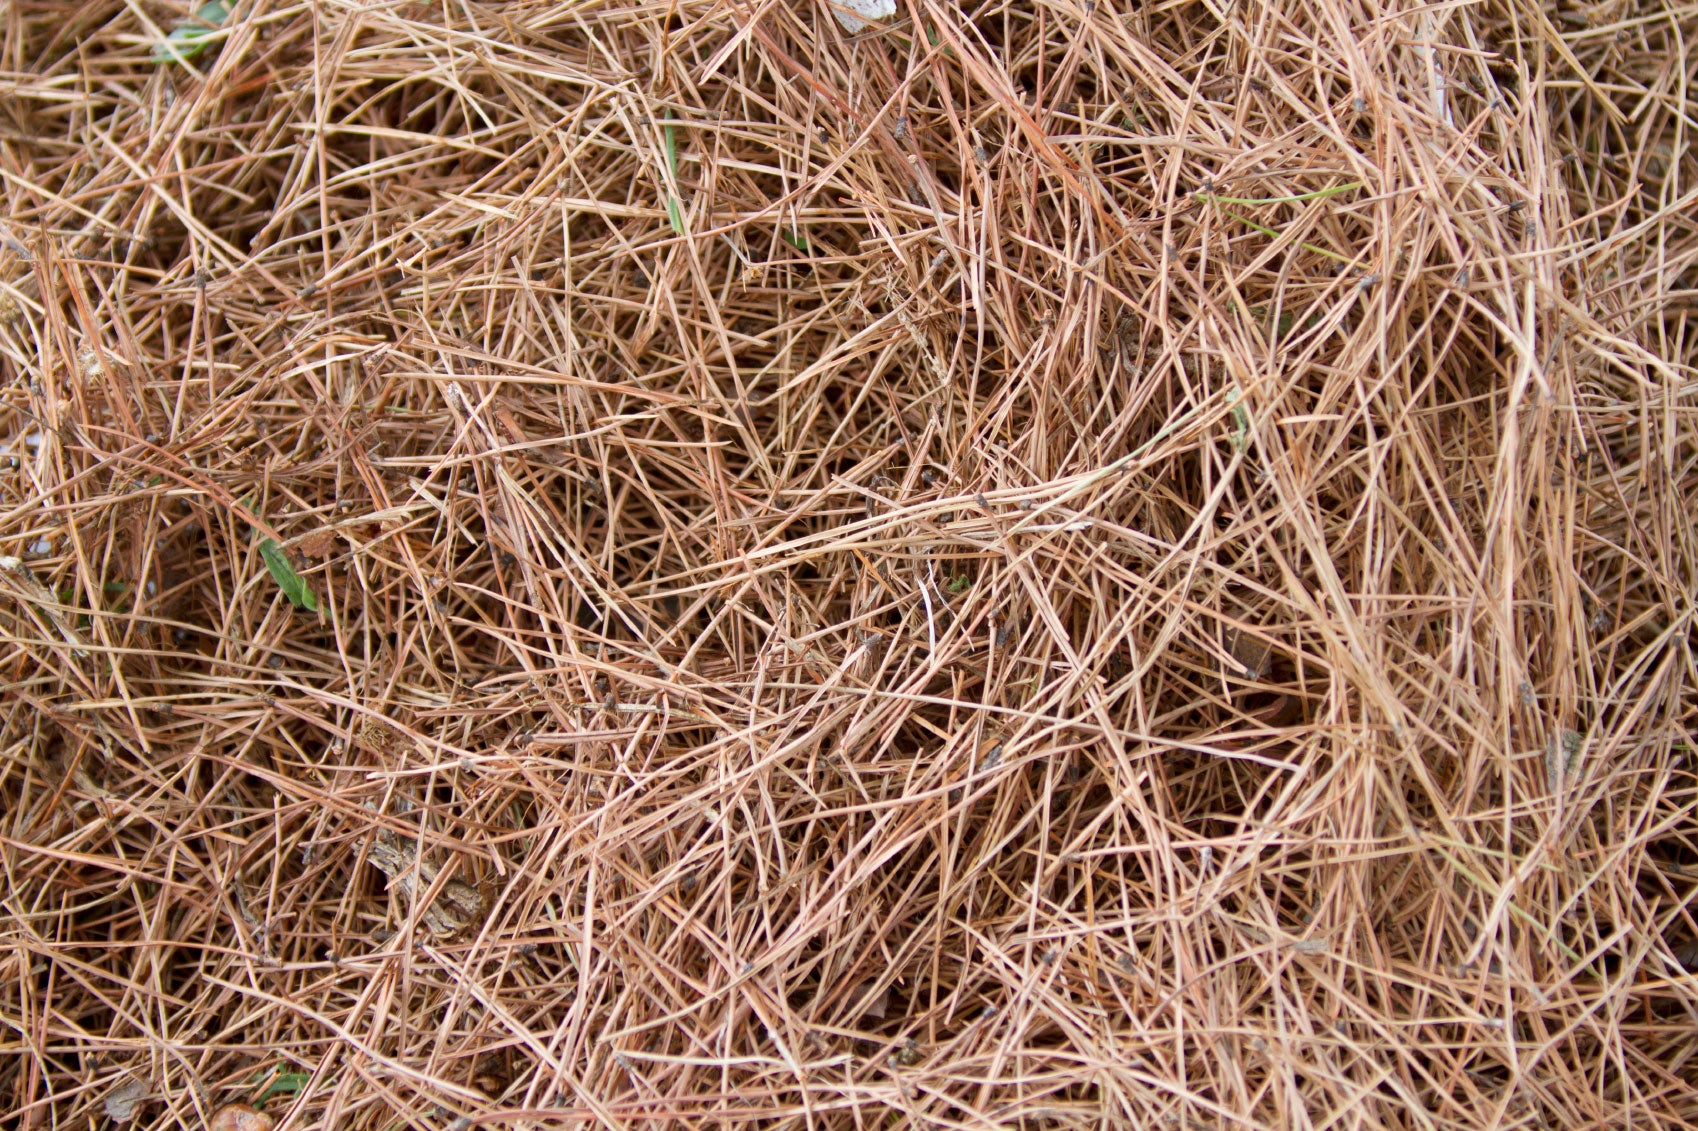 Pine Needles In Compost - Are Pine Needles Bad For Compost